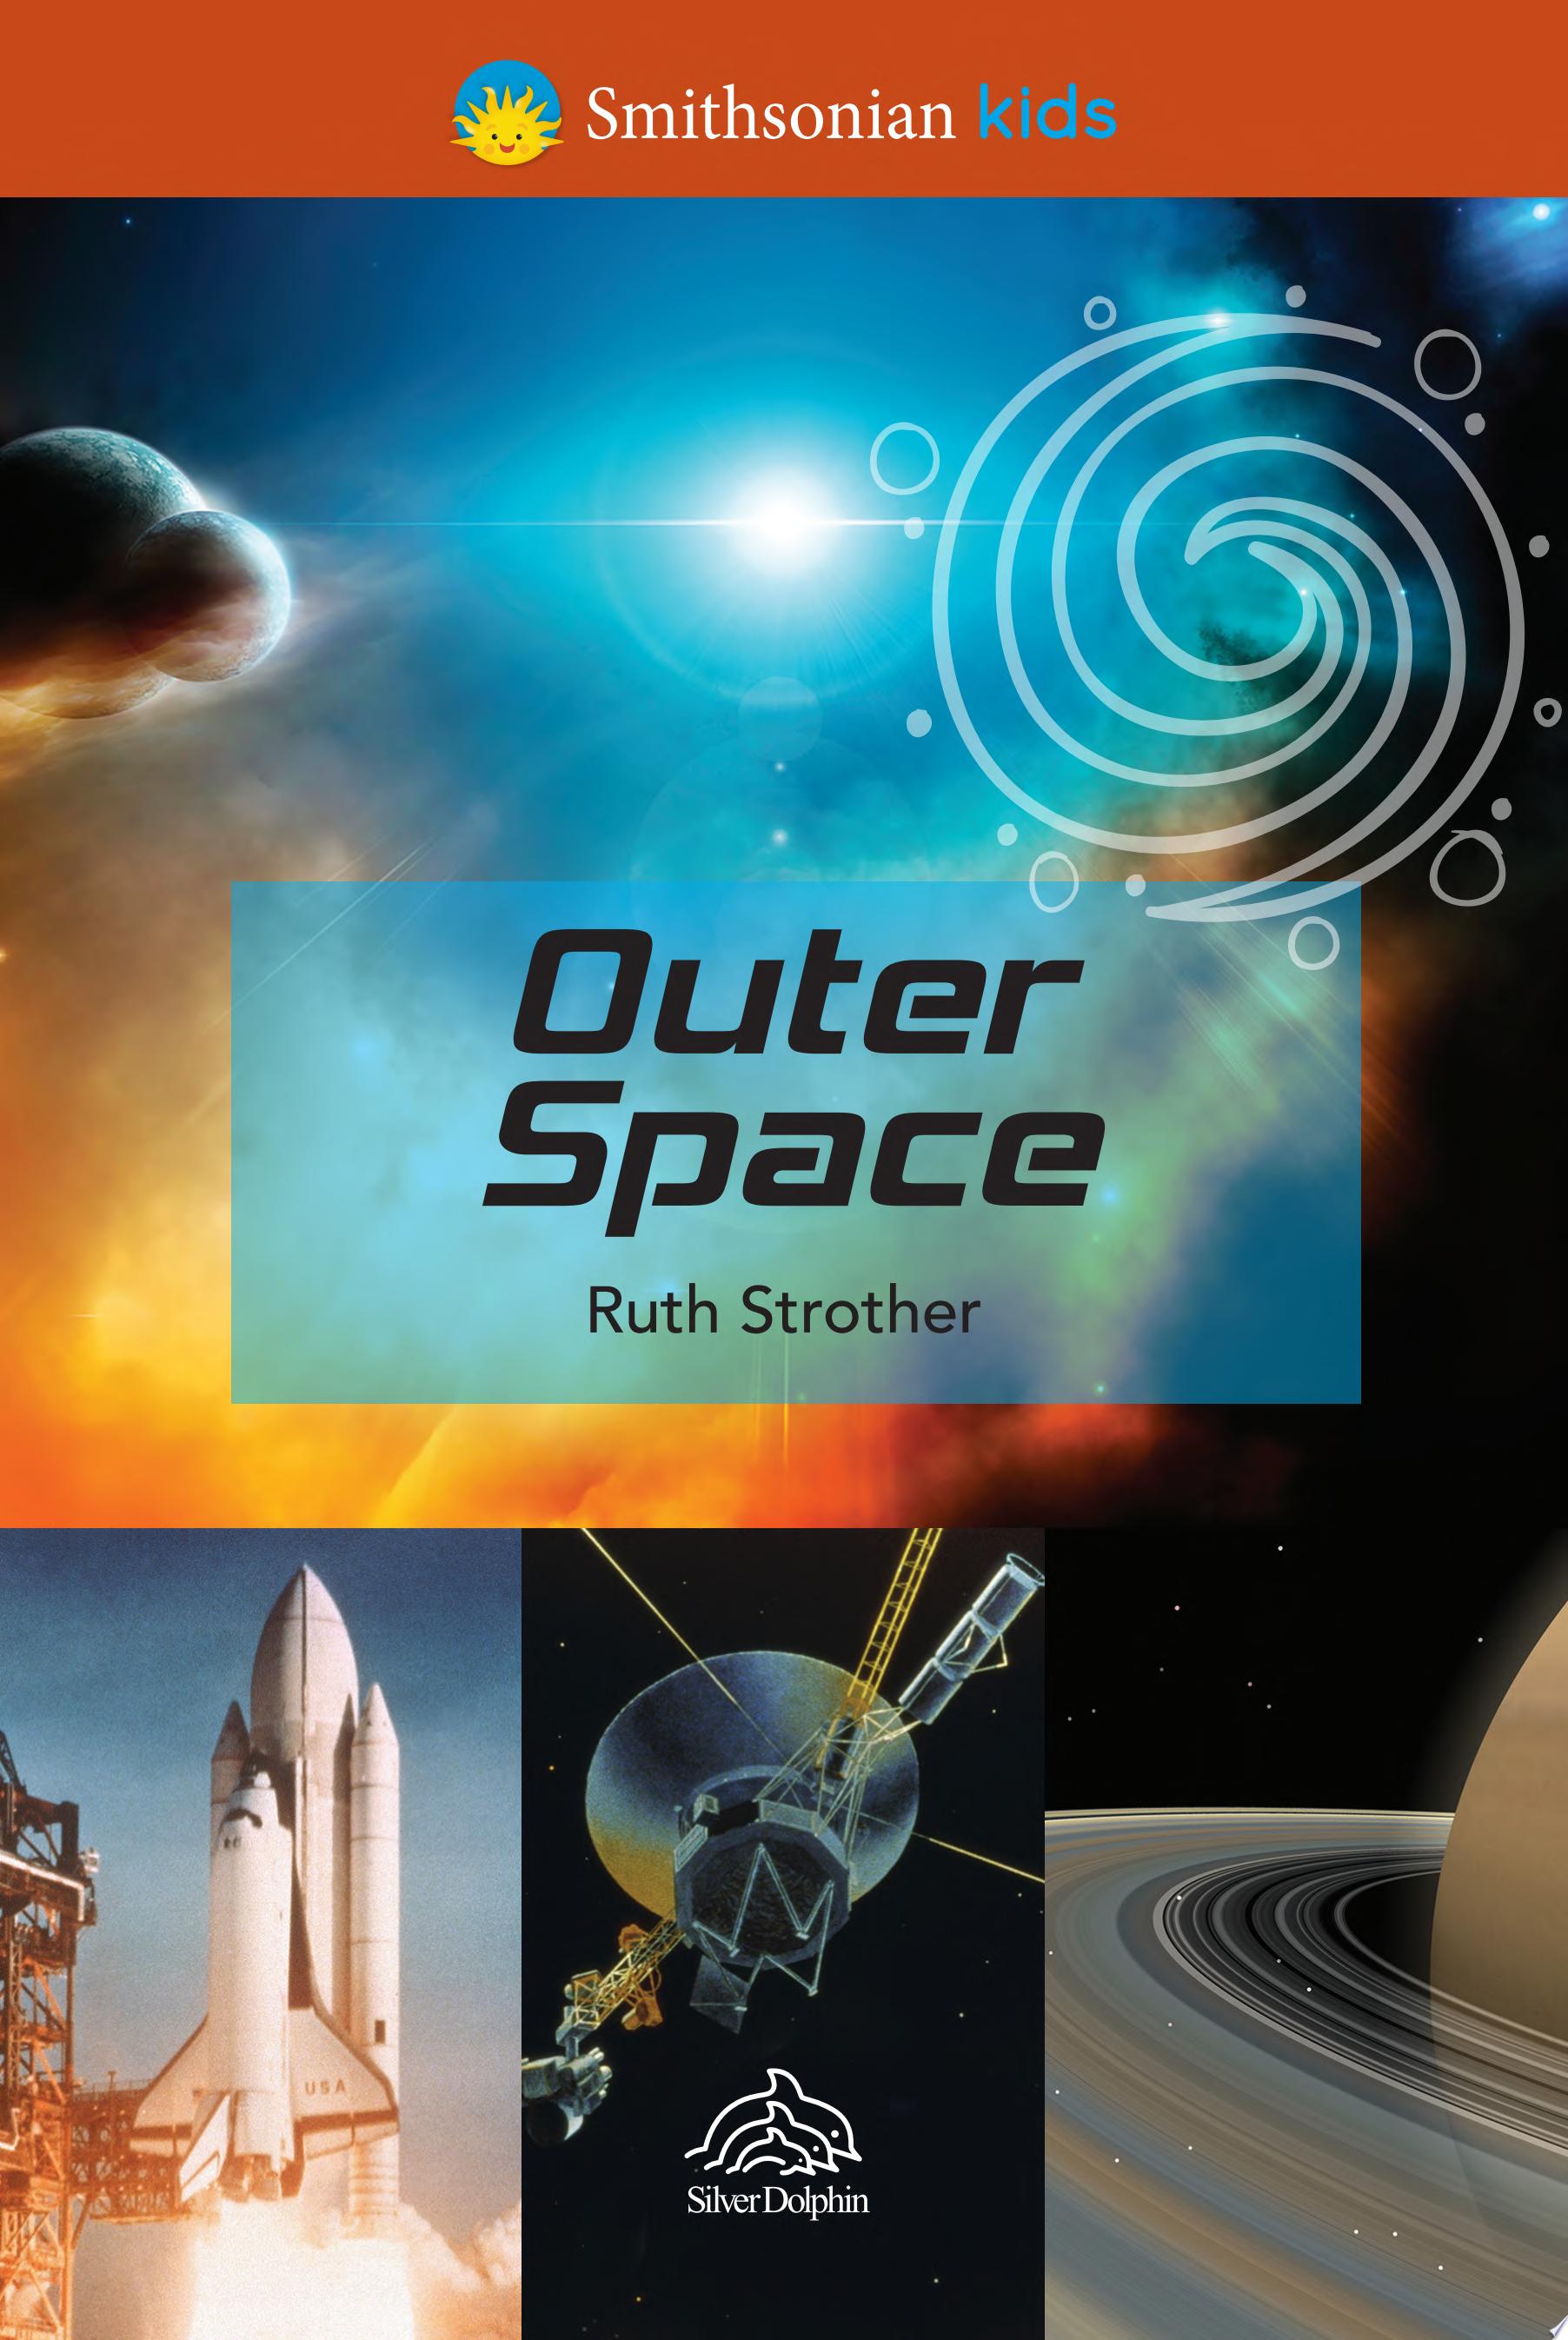 Image for "Smithsonian Kids All-Star Readers: Outer Space Level 1 (Library Binding)"